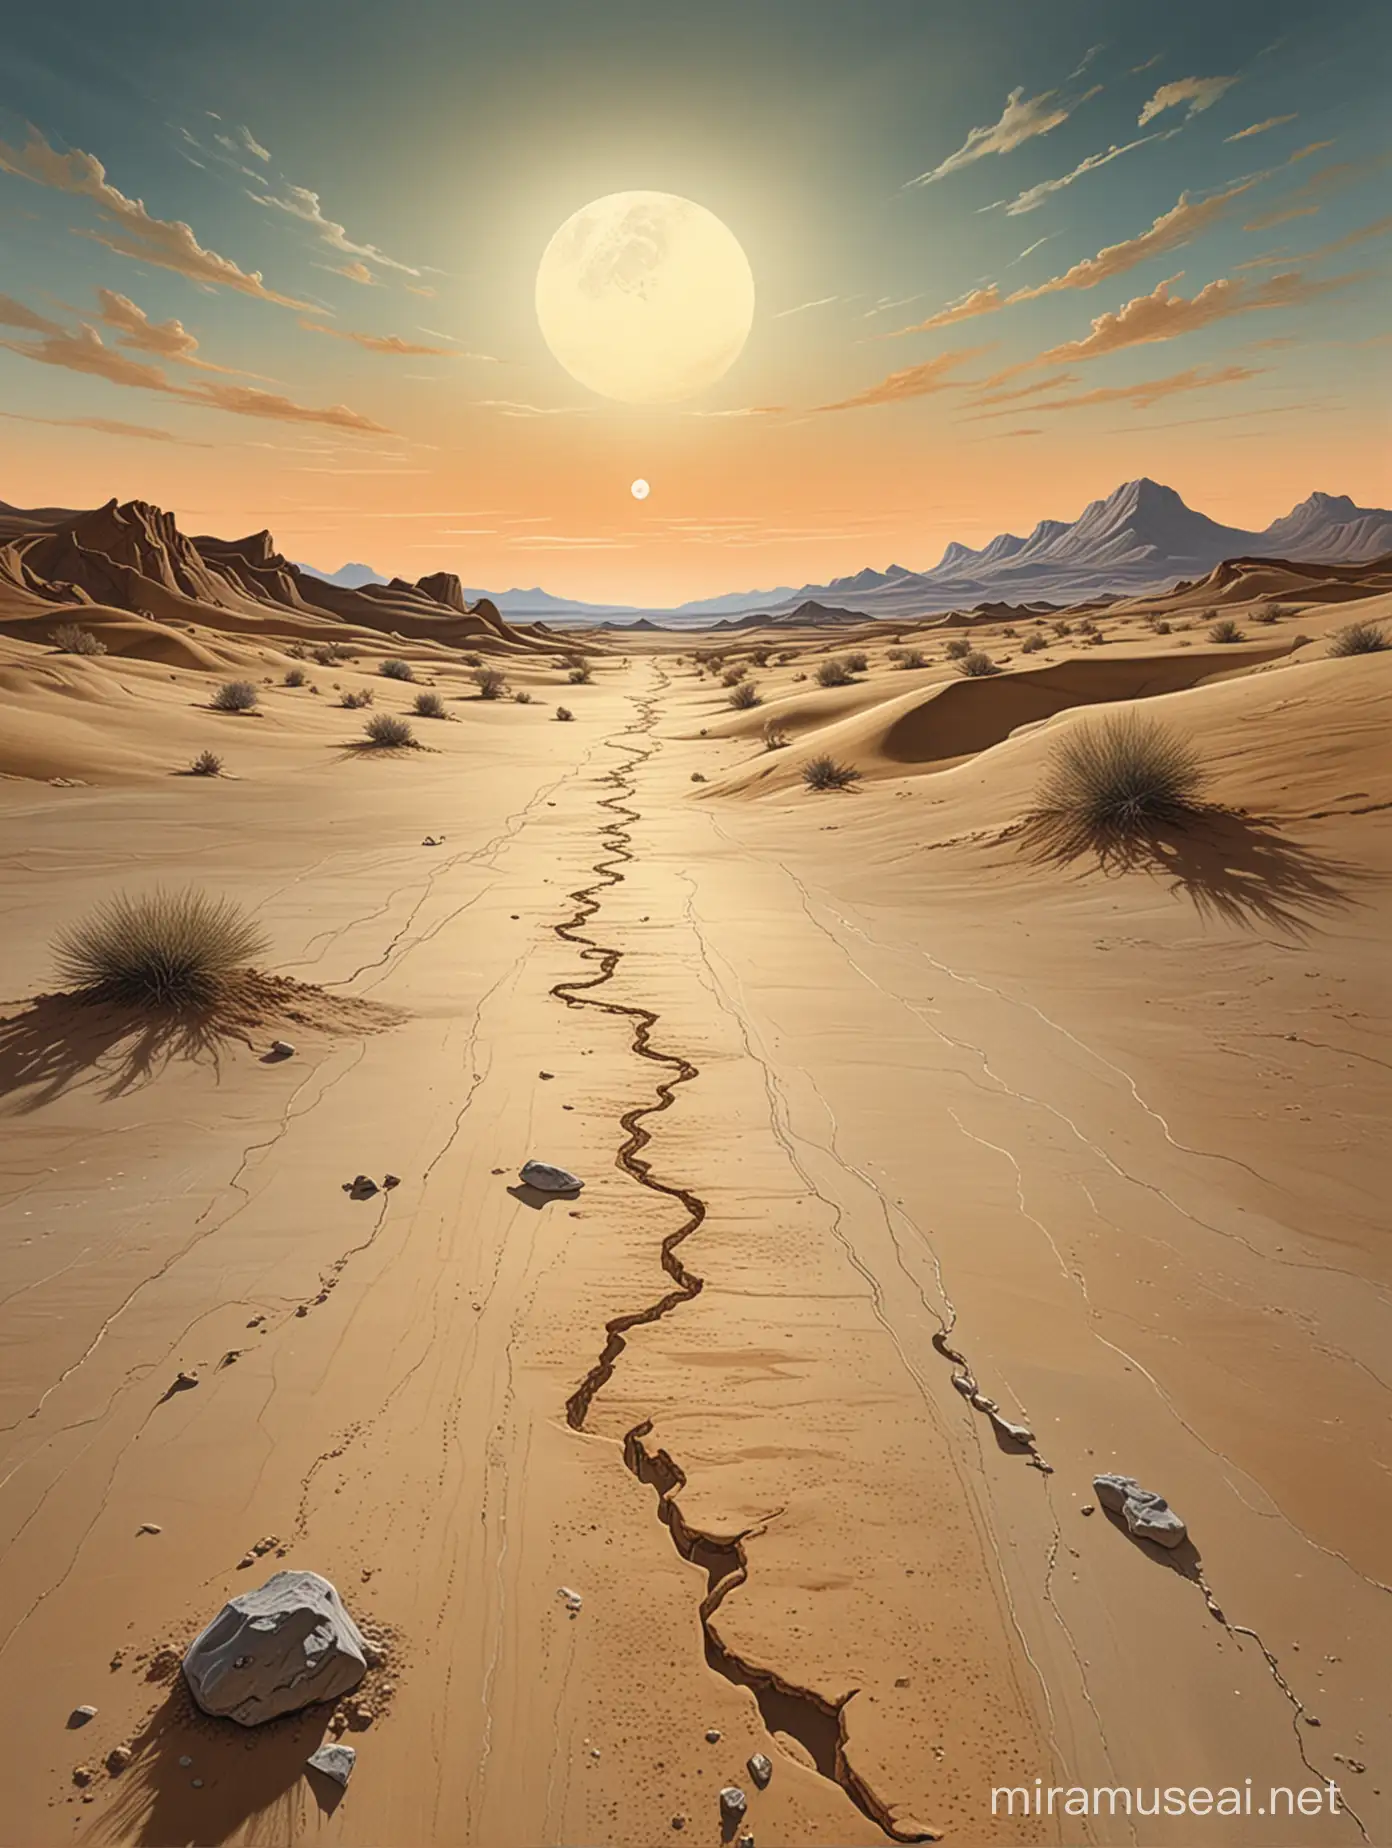 Highly detailed painting closely based on ("The Persistence of Memory" by Salvador Dali), wide view, dry desert, pale crescent moon in the sky, use muted pastel colors only, high quality